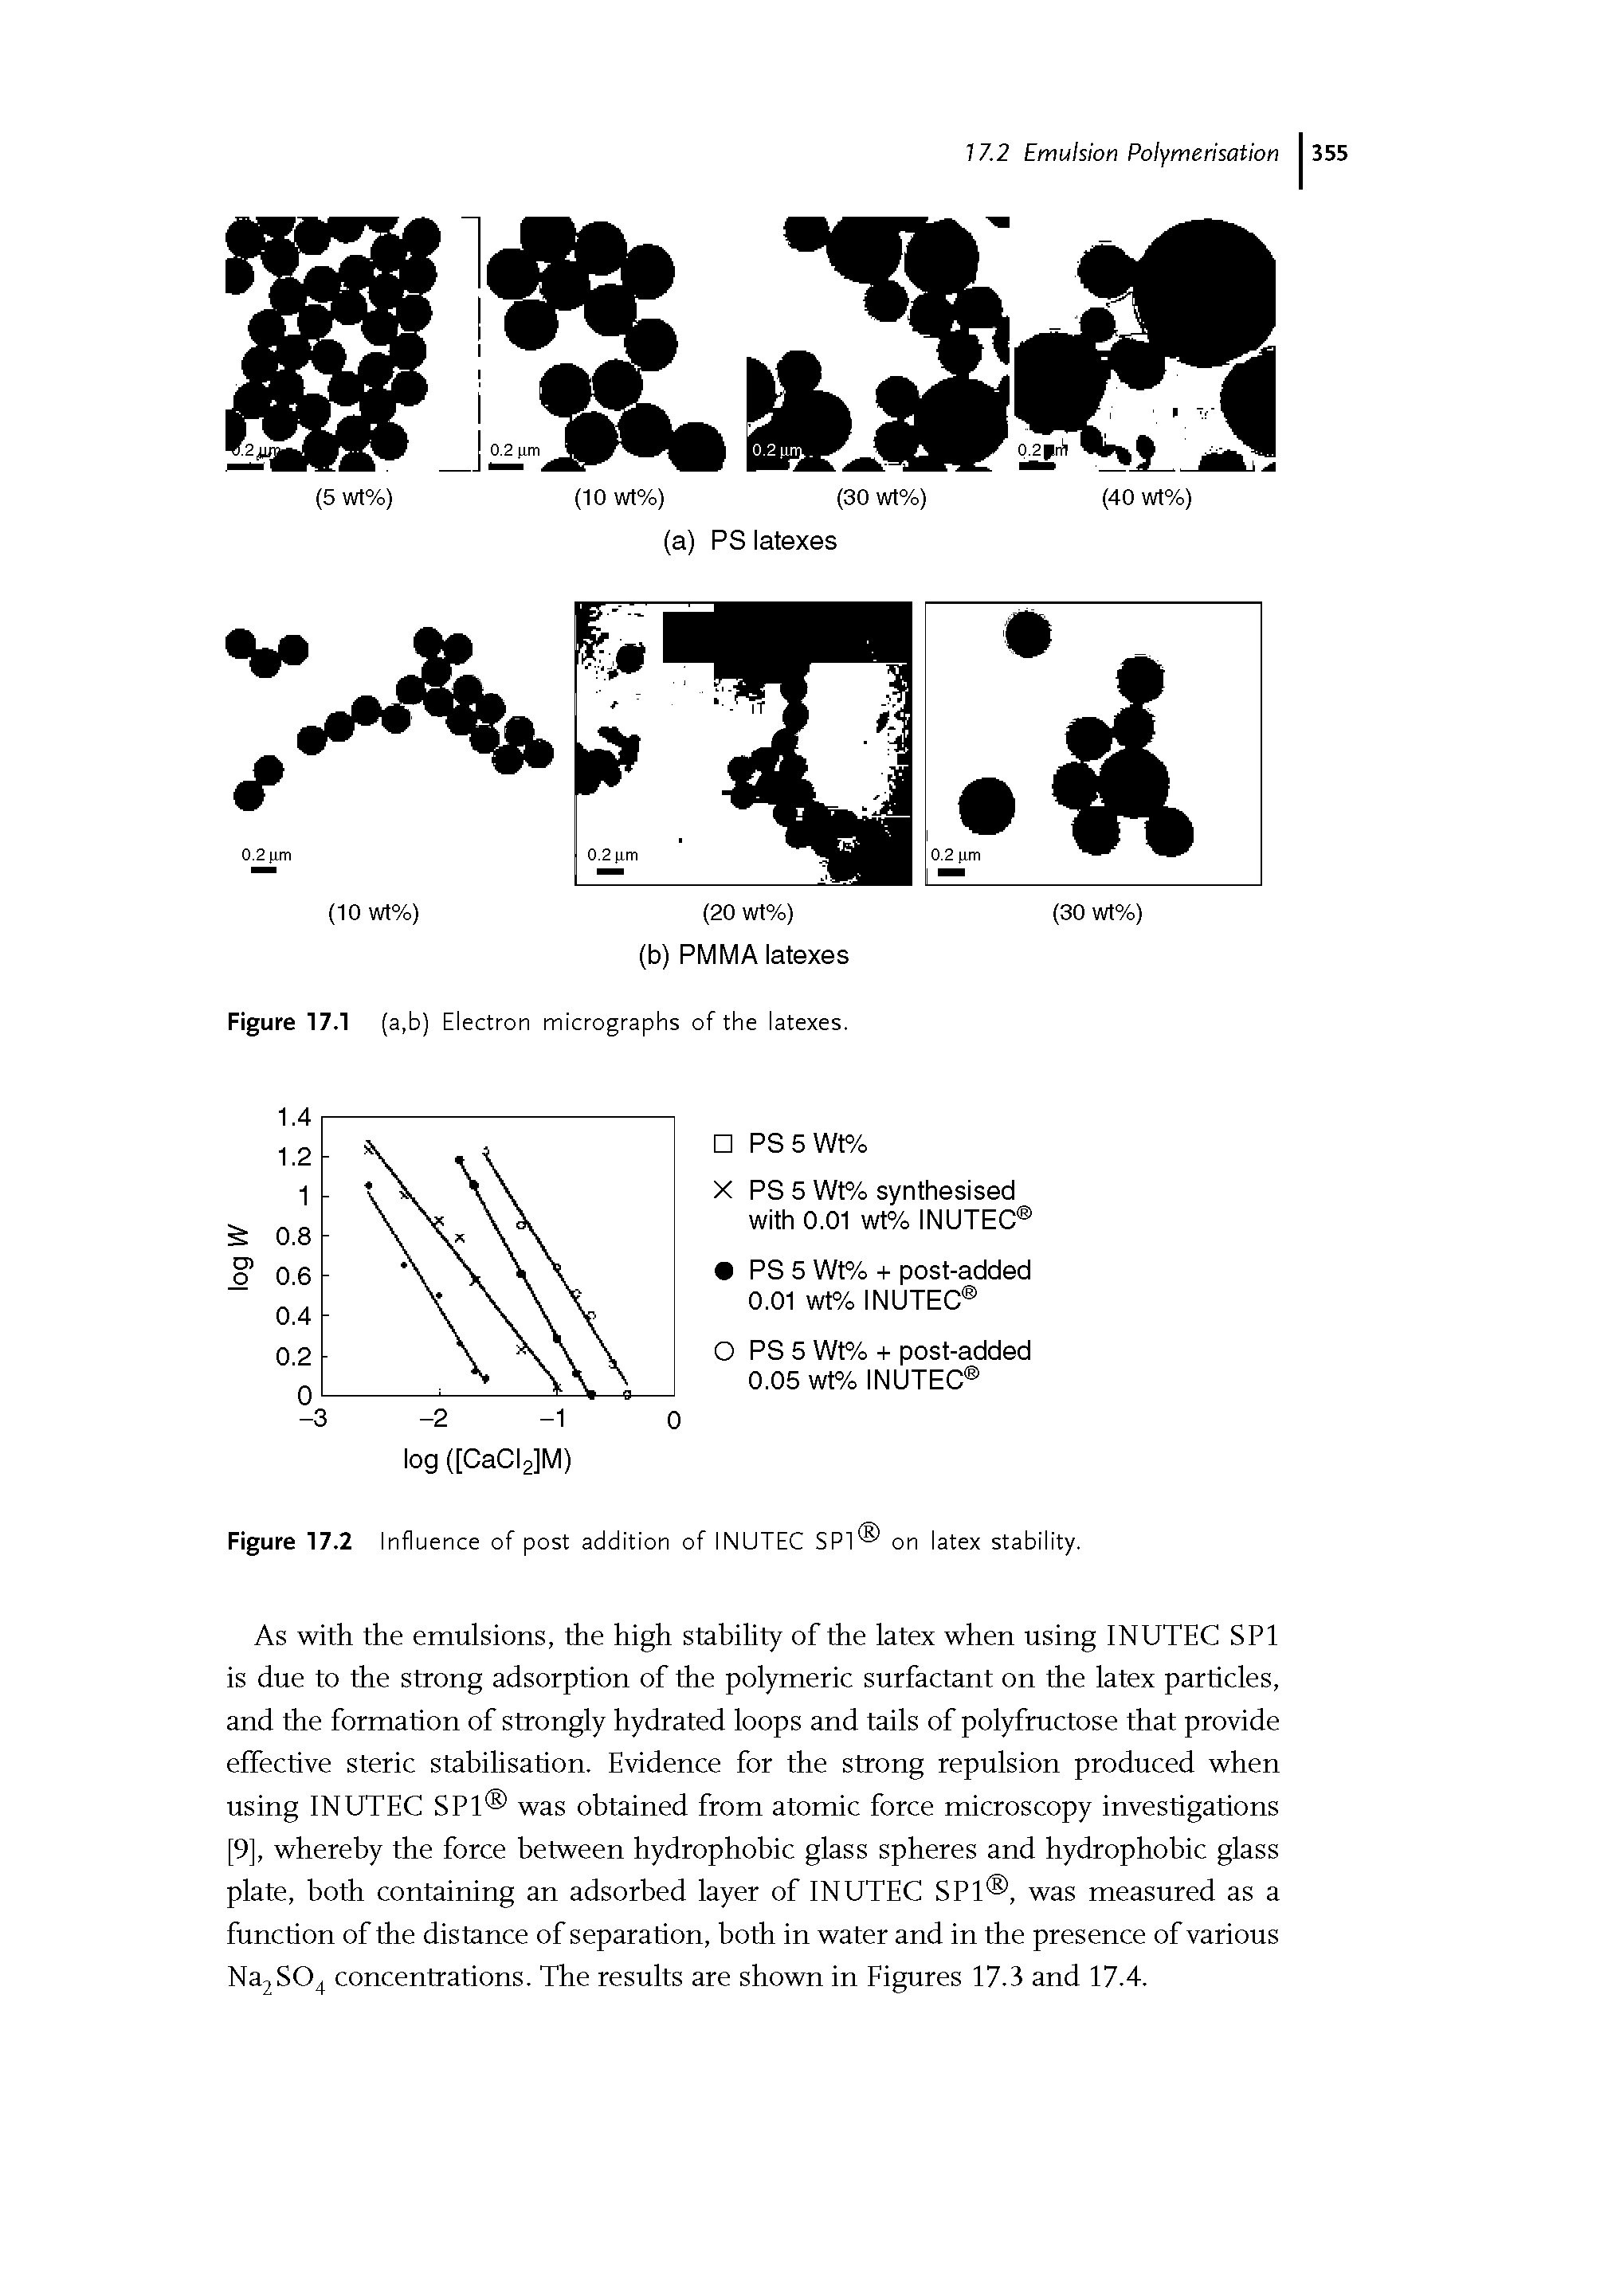 Figure 17.2 Influence of post addition of INUTEC SPl on latex stability.